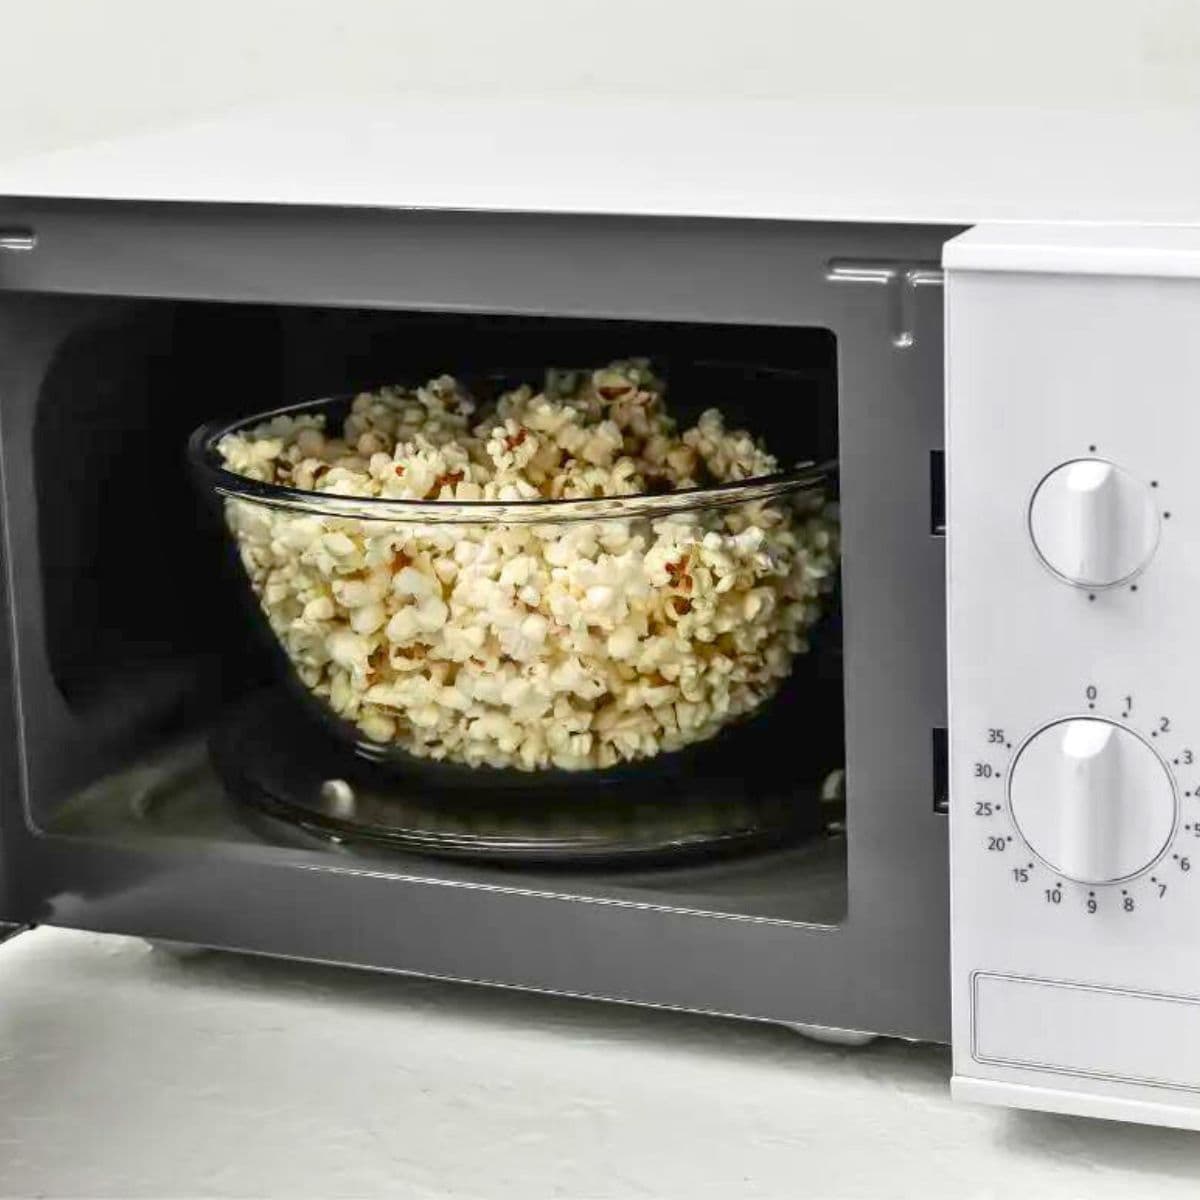 How To Get Burnt Popcorn Smell Out Of Microwave featured image